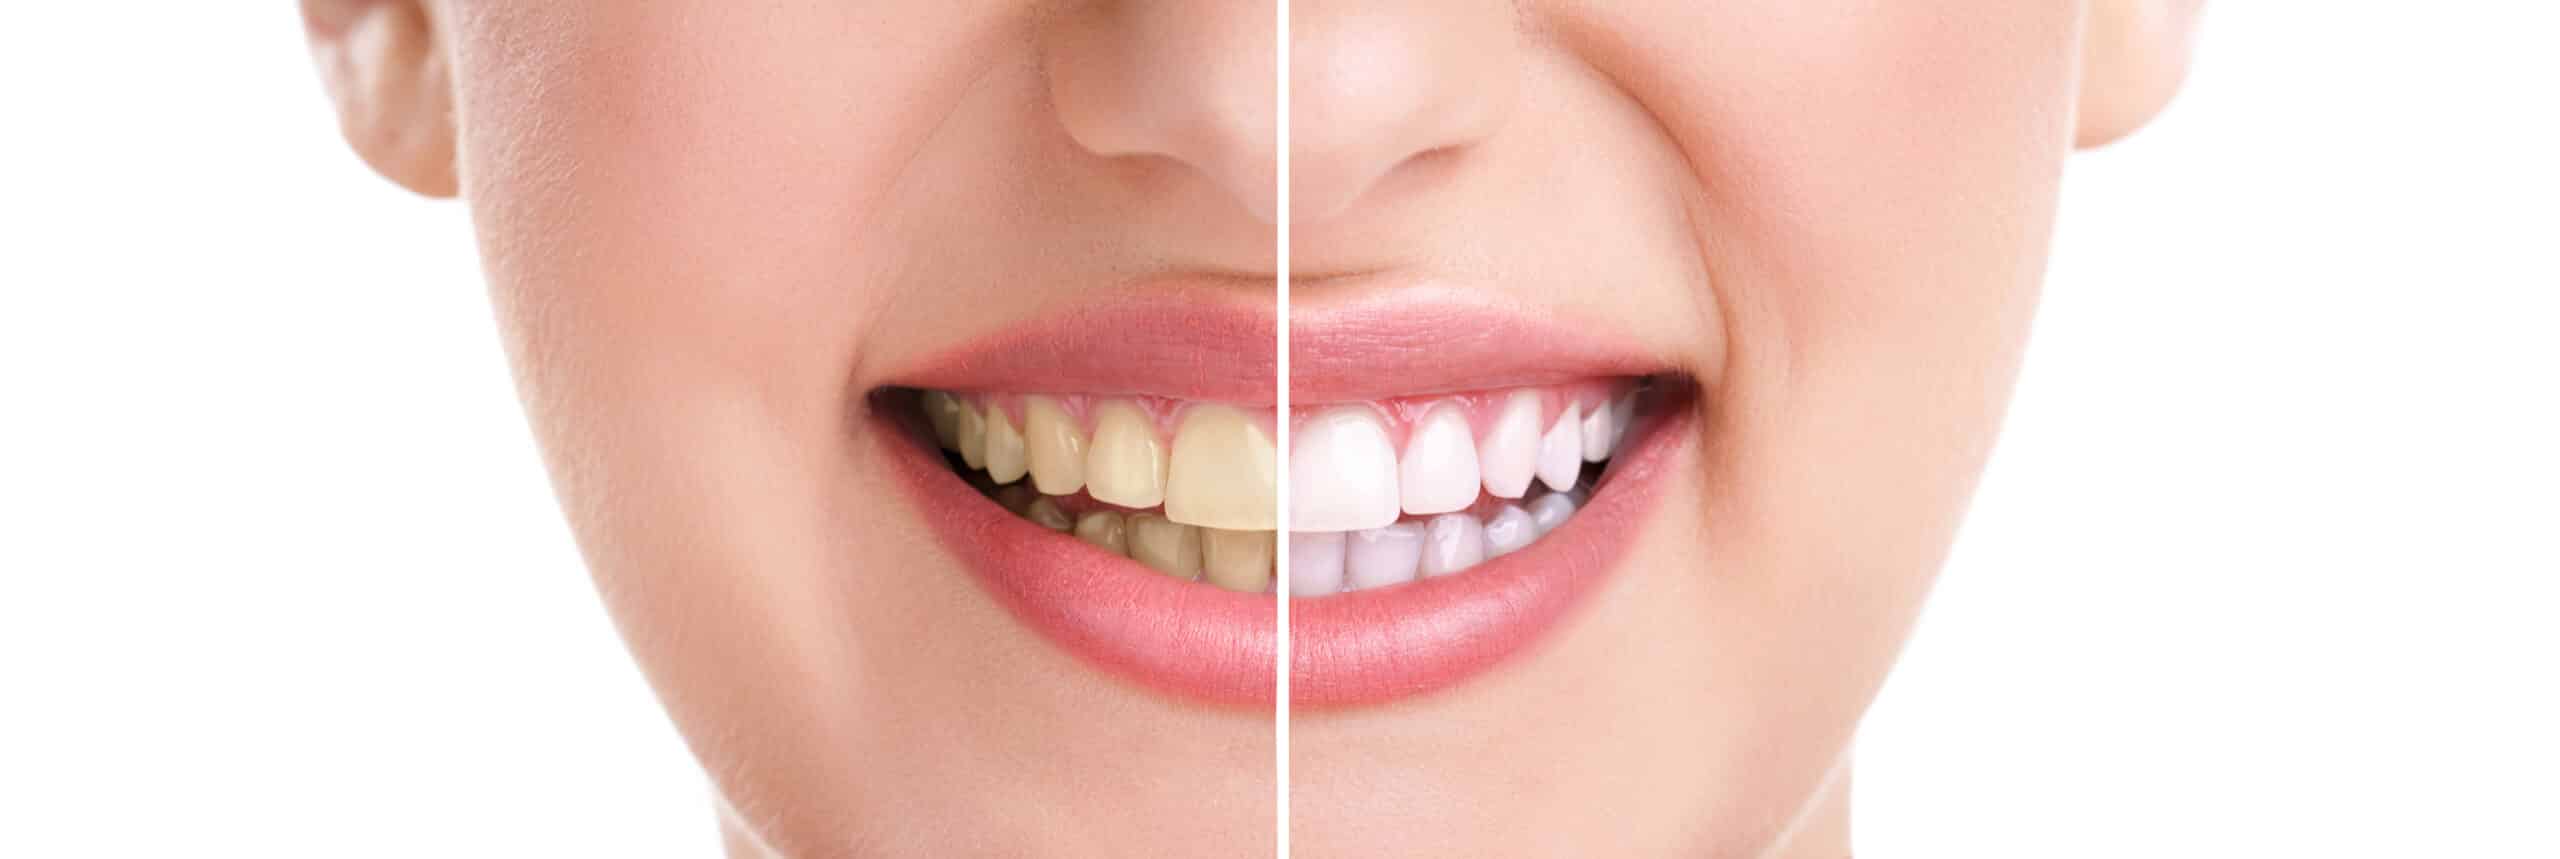 woman teeth and smile, close up, isolated on white, whitening treatment. Are Teeth Naturally Yellow or White?